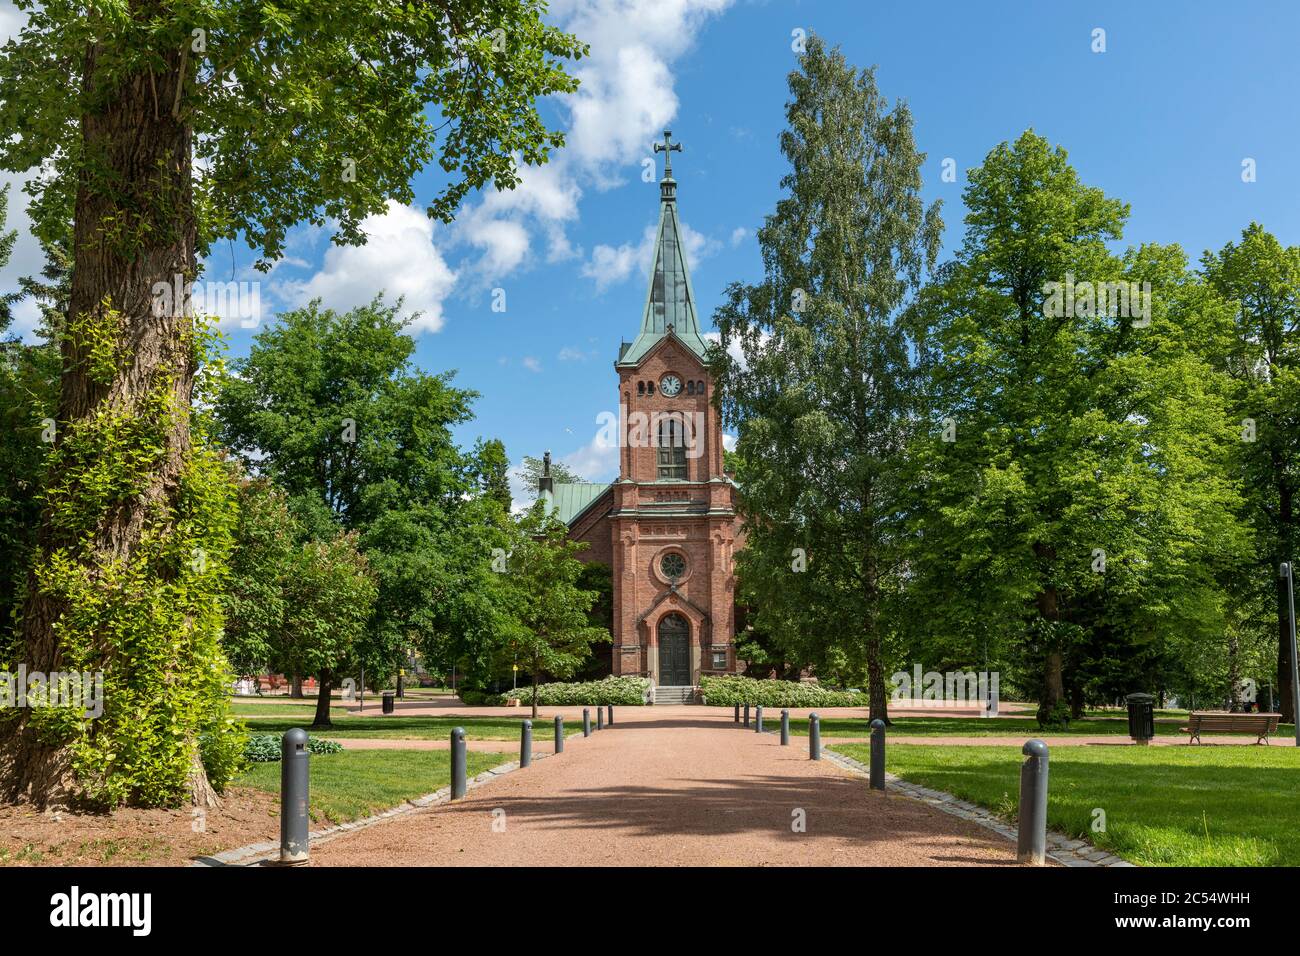 City church of Jyväskylä was built in 1880 downtown. Red brick church is surrounded by public park which is a famous place to see friends. Stock Photo